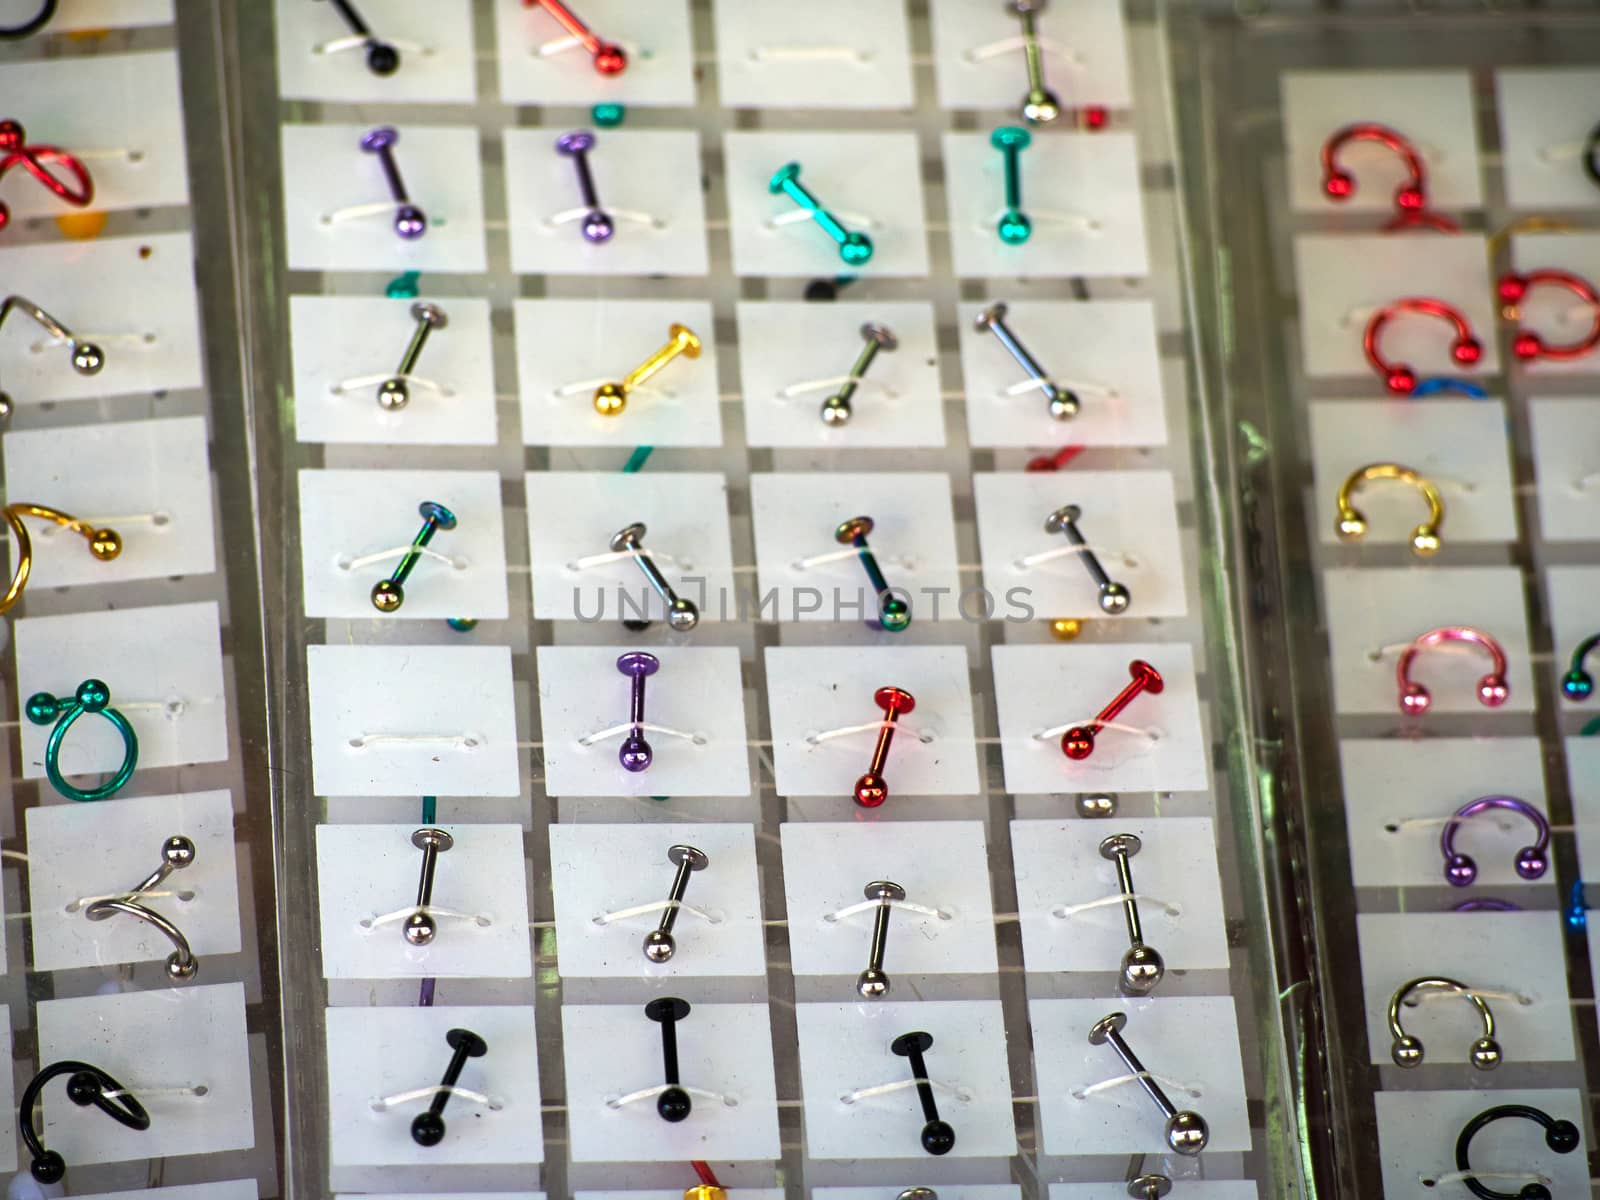 Jewelry for ear, nose and body piercing by Ronyzmbow